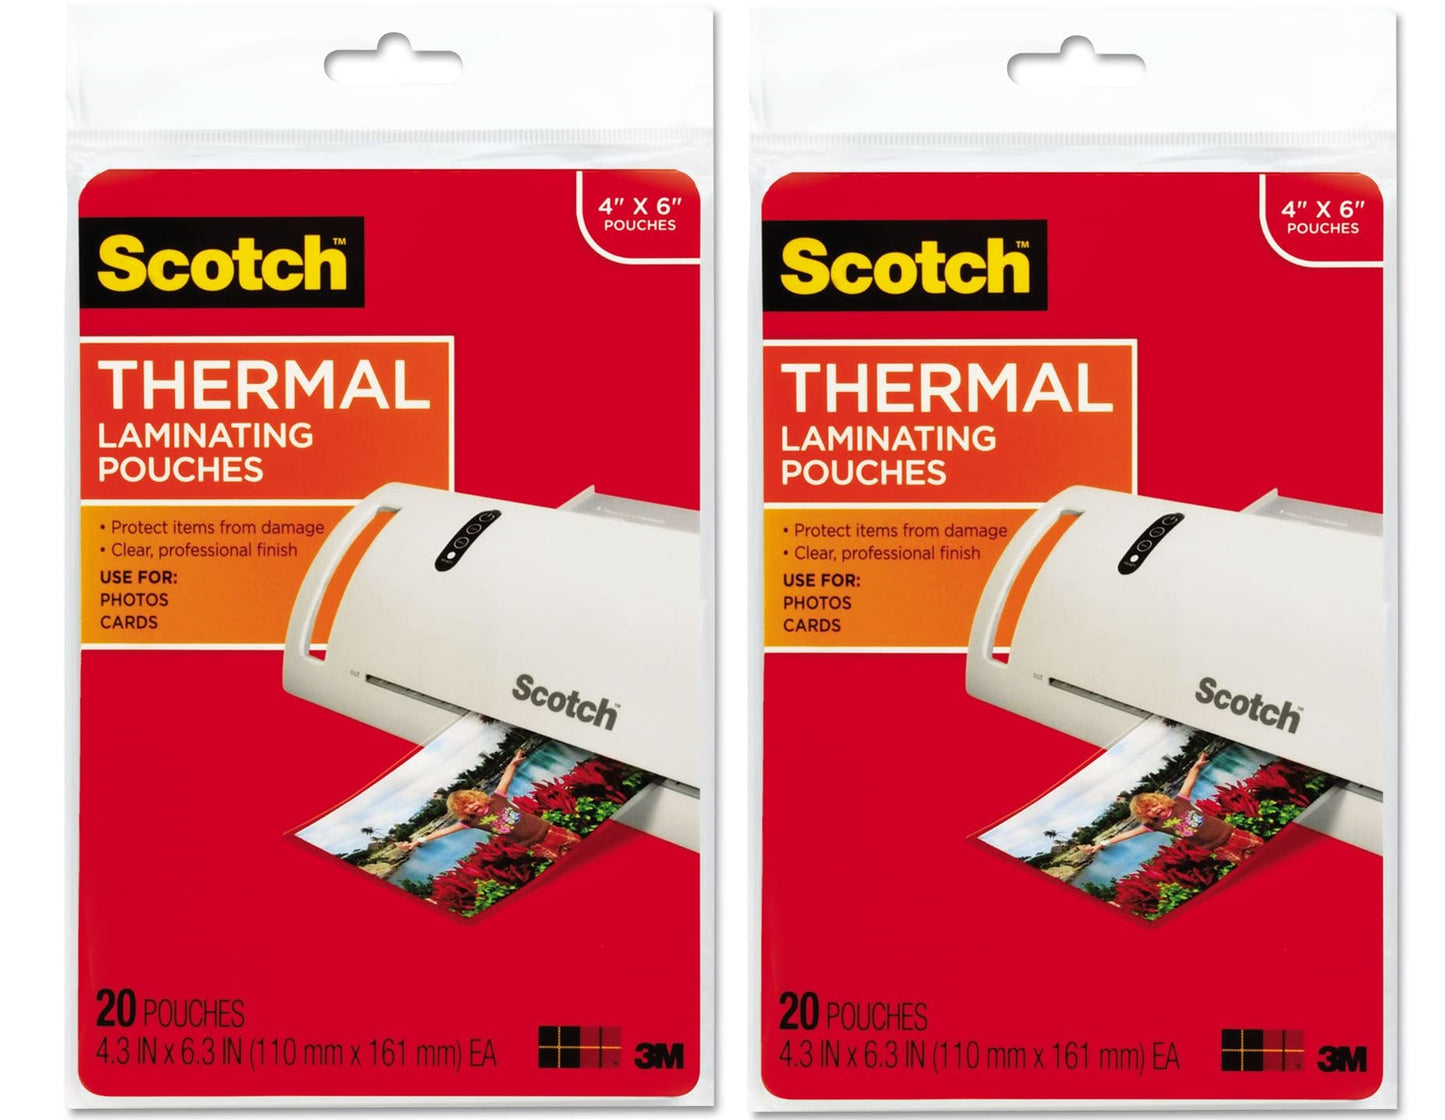 Scotch Thermal Pouches TP5900-20 for items ups to 4.33 in x 6.06 in, 5 mil Laminating Pouches 20/Pack - 2 Pack